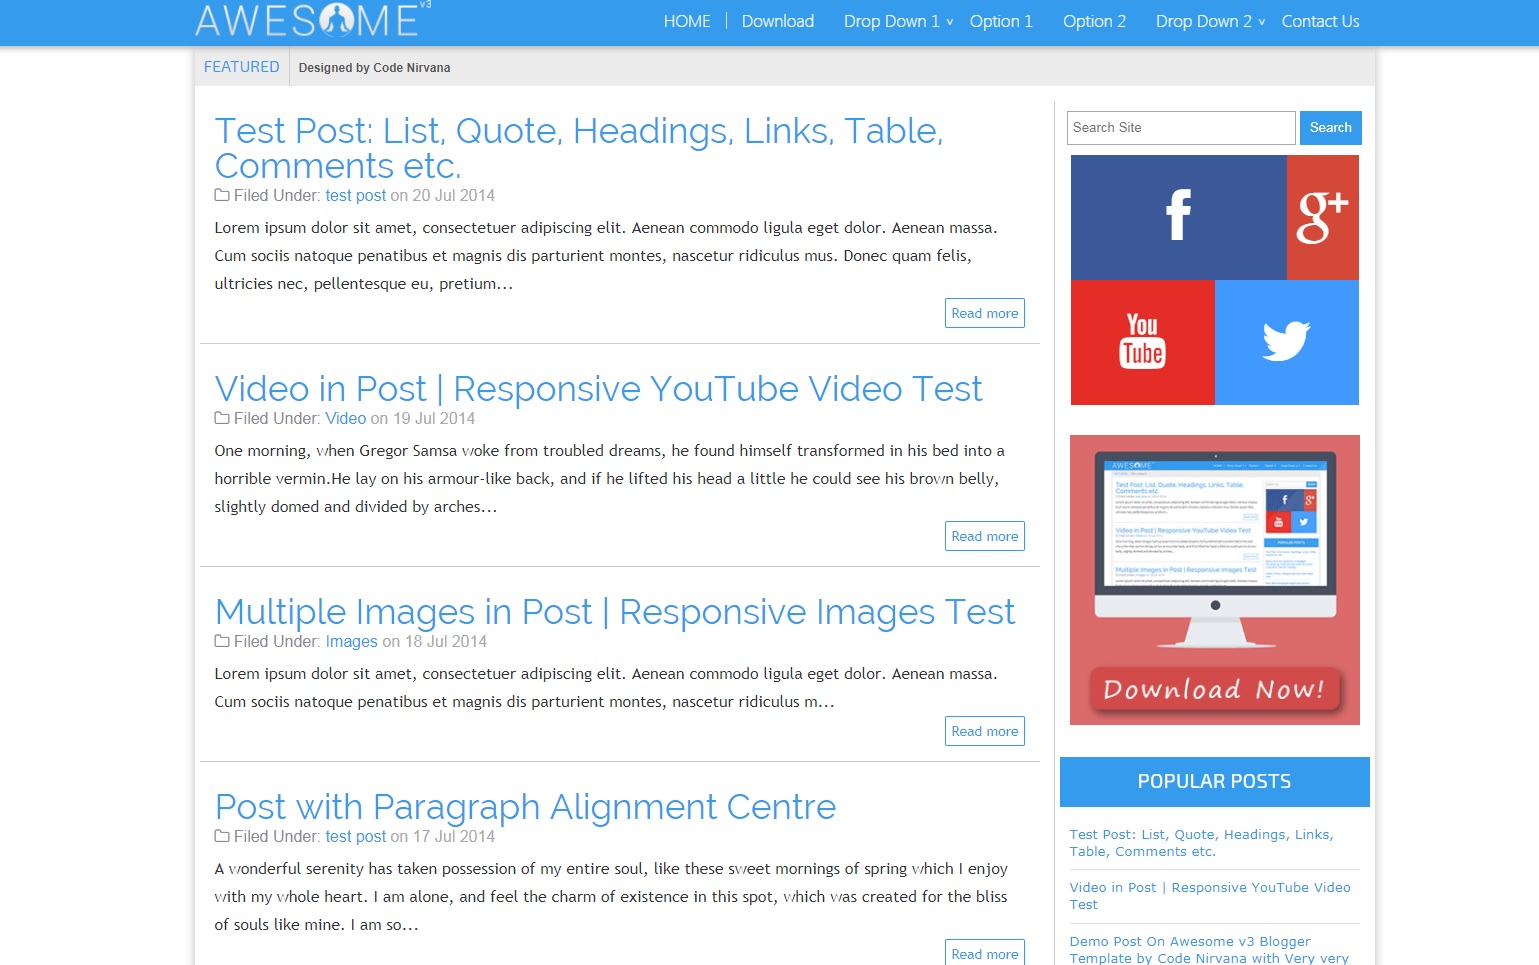 AWESOME v3 Responsive Blogger Template